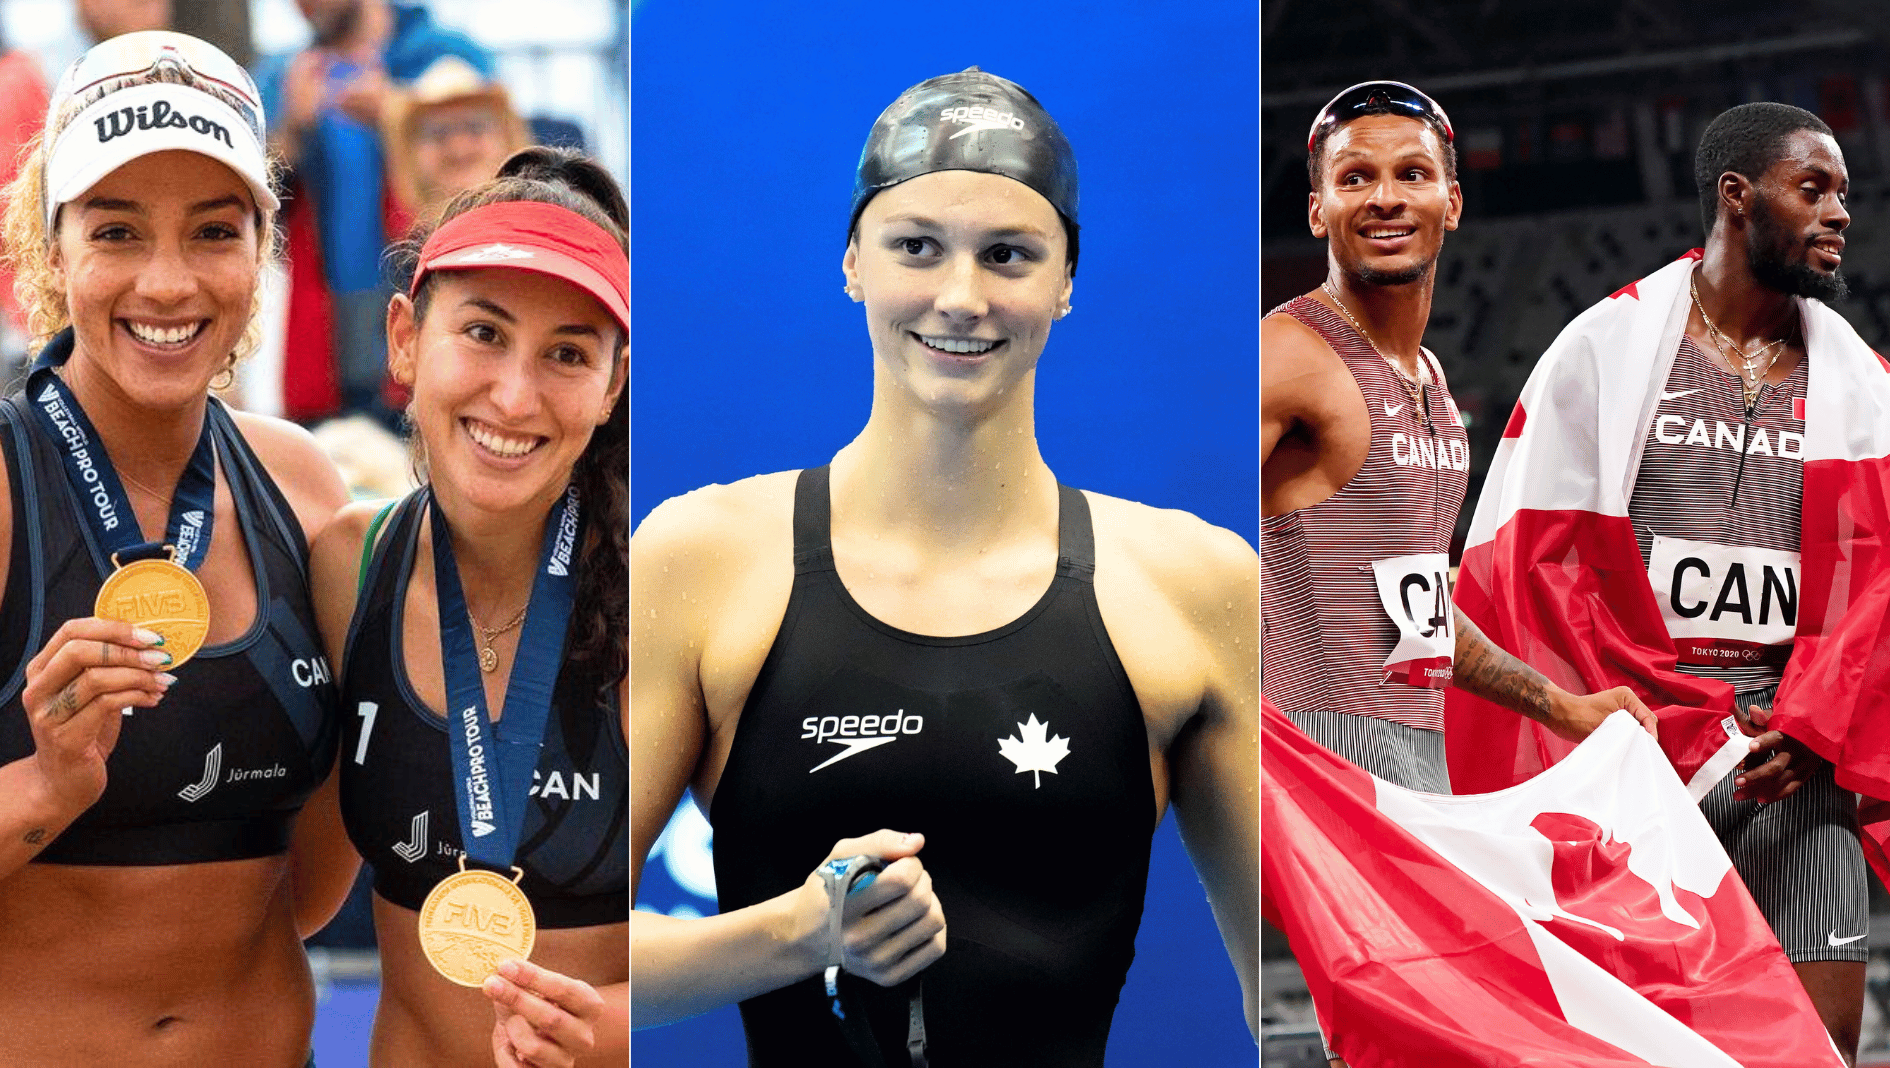 5 sports to watch for Team Canada this weekend July 28-30 - Team Canada